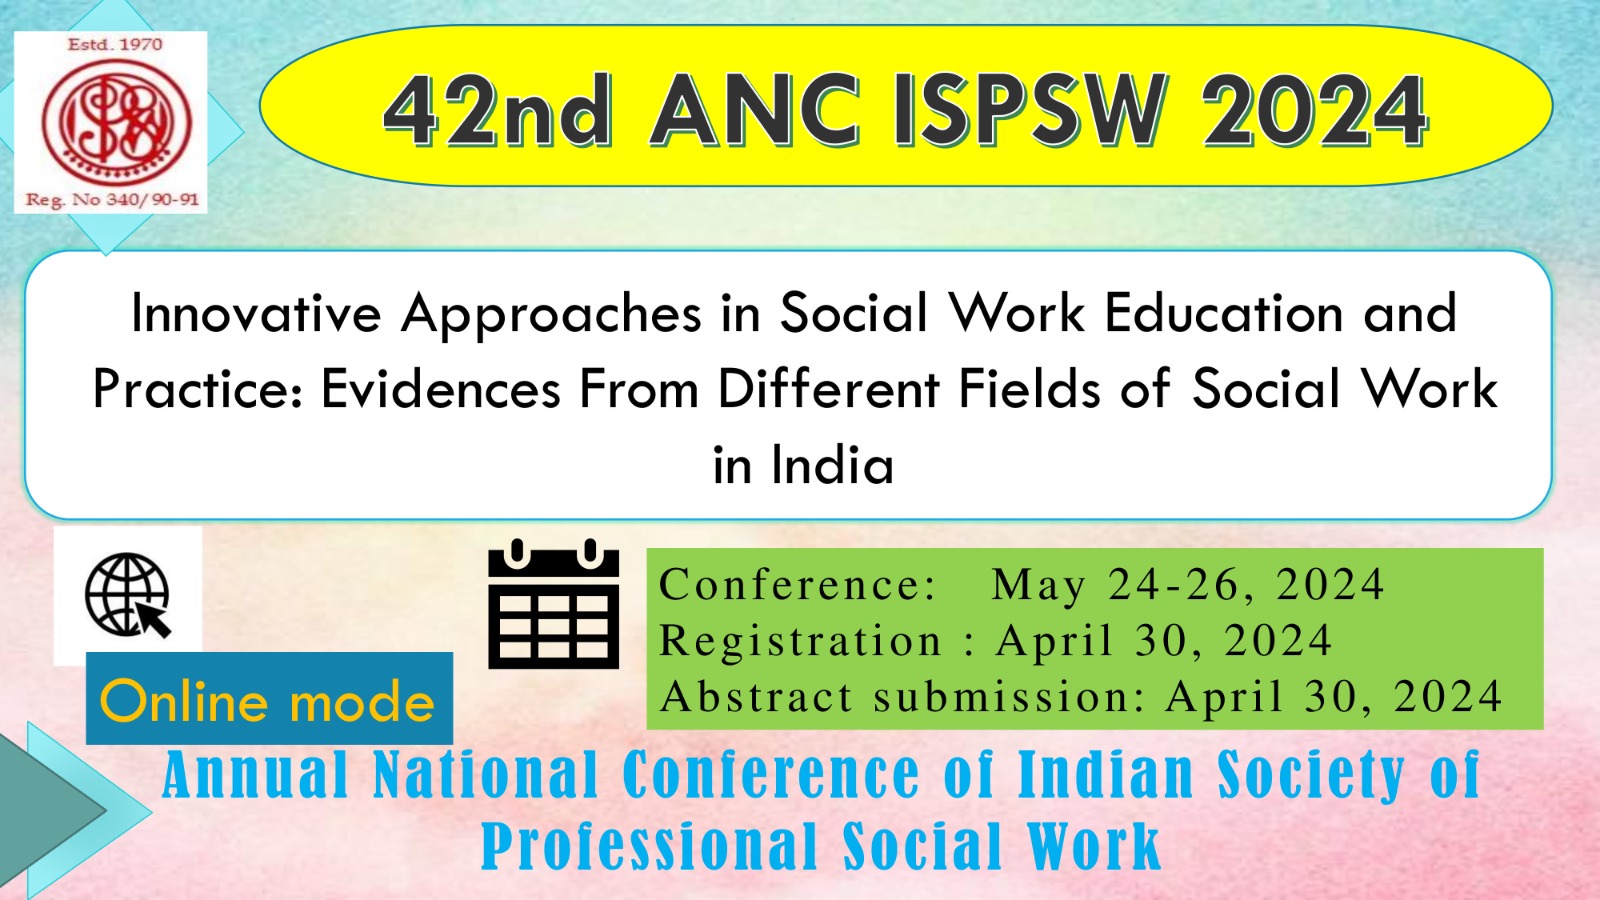 					View XLII Annual National Conference of ISPSW 2024
				